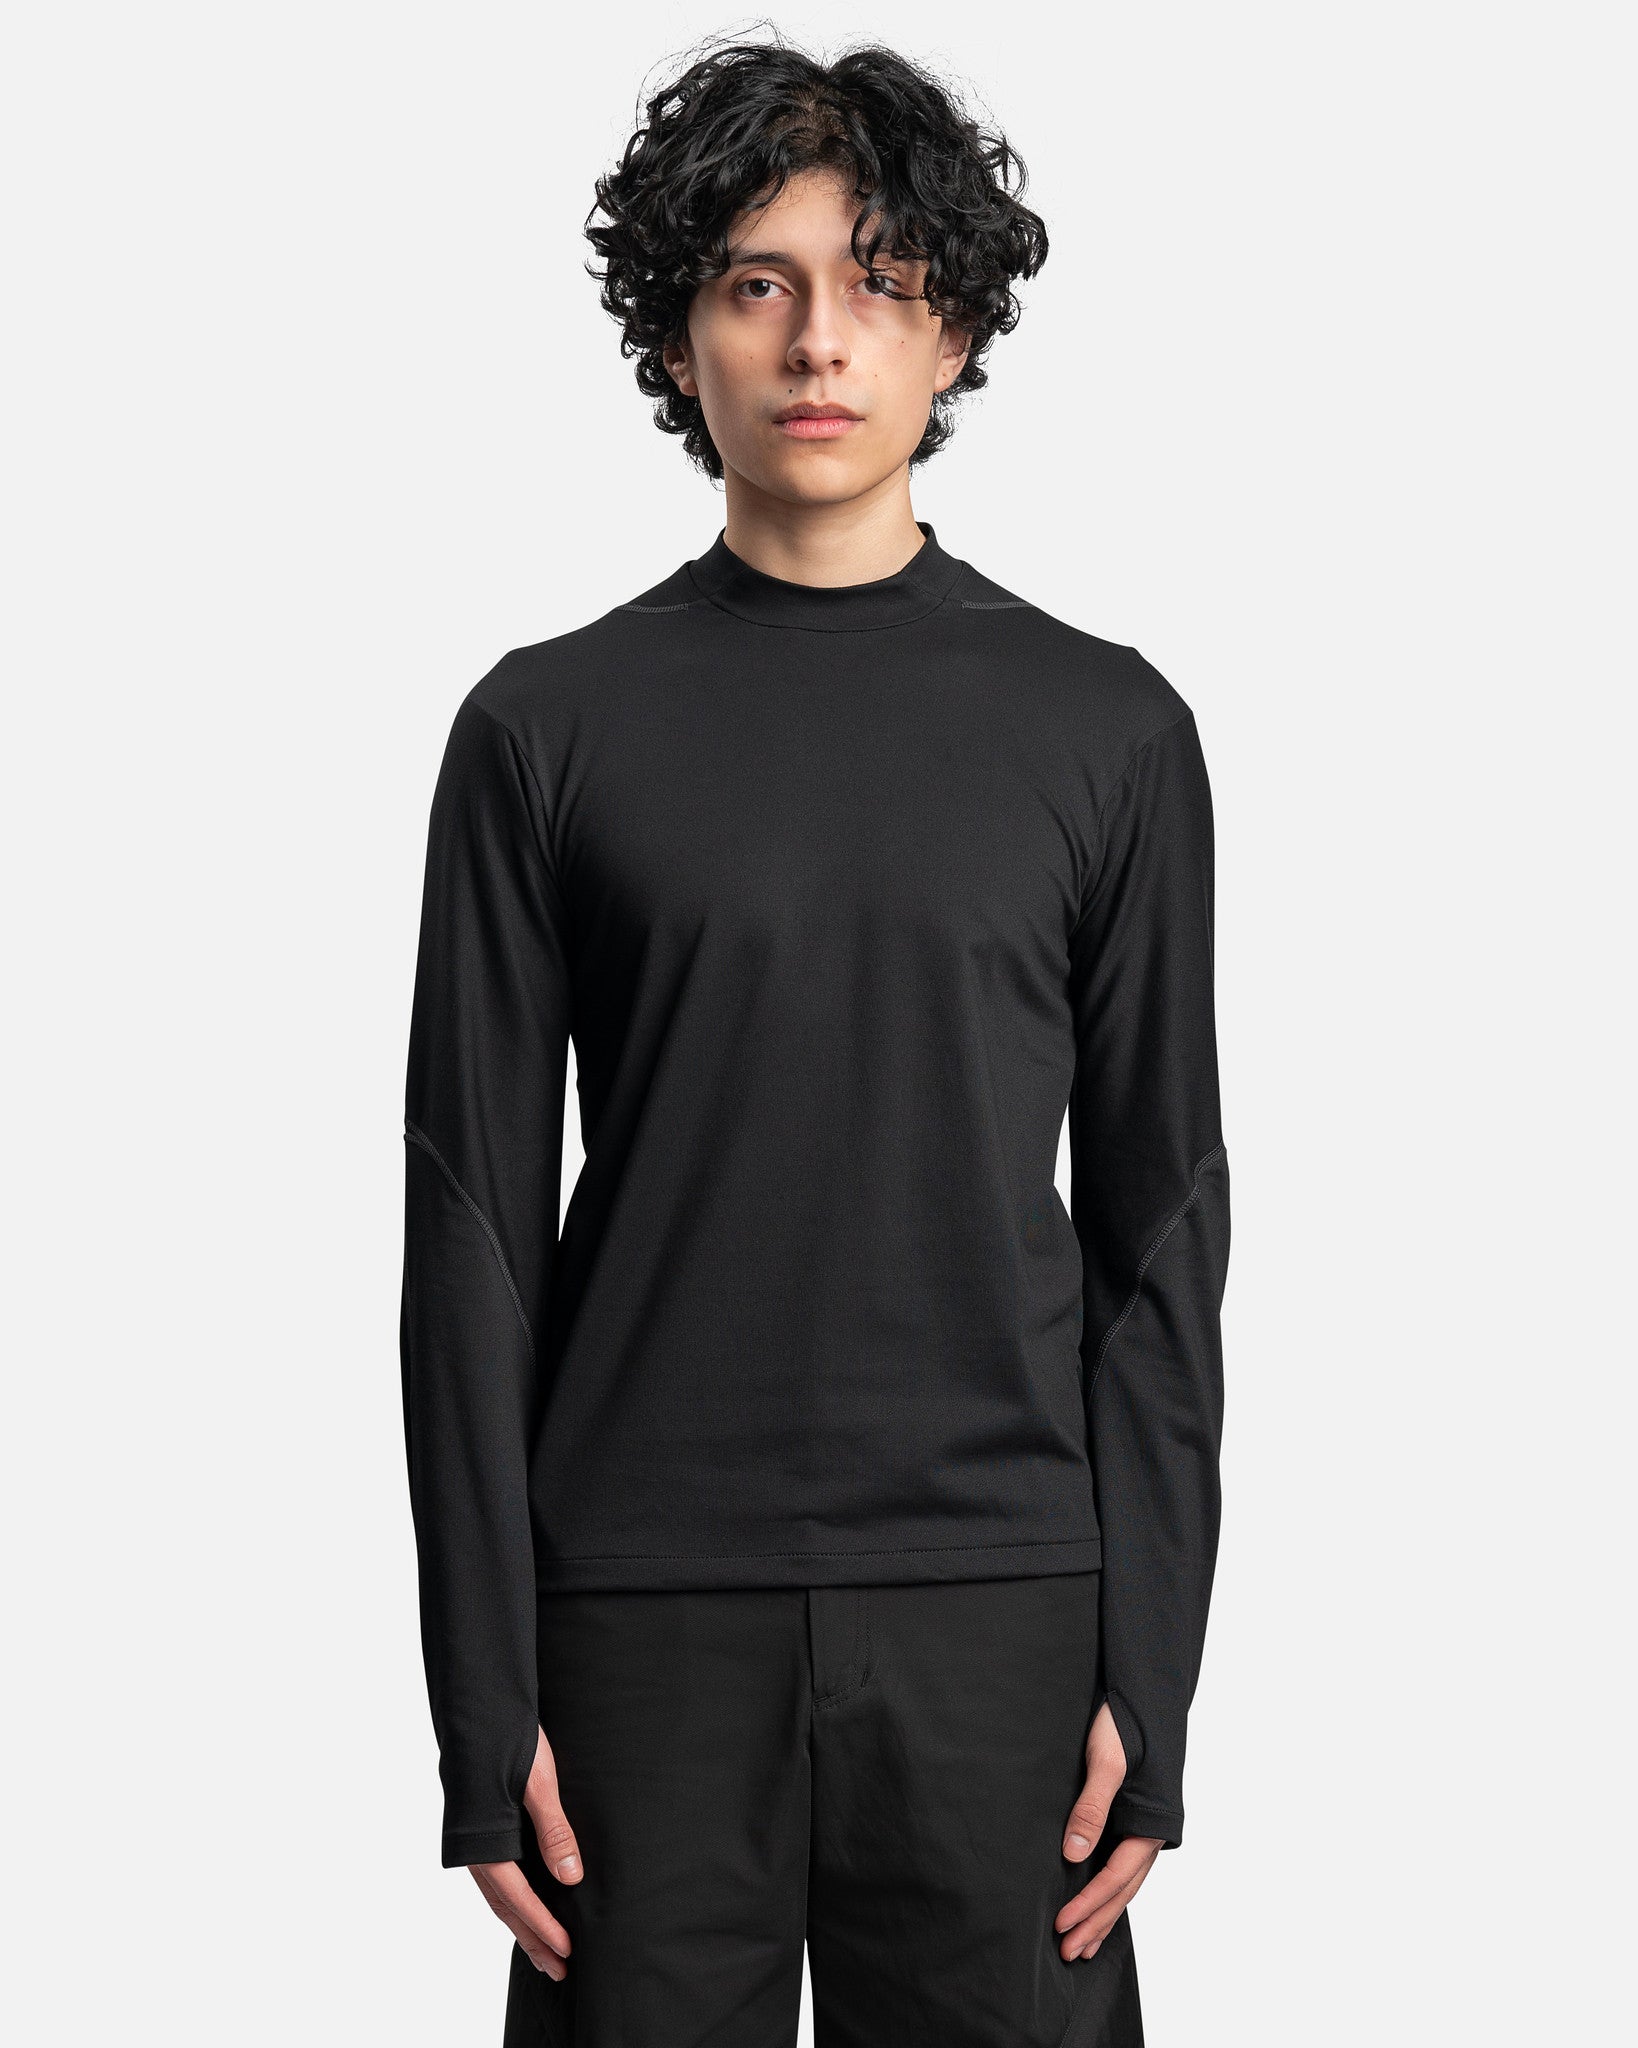 POST ARCHIVE FACTION (P.A.F) Men's T-Shirts 5.0 Long Sleeve Right T-Shirt in Black